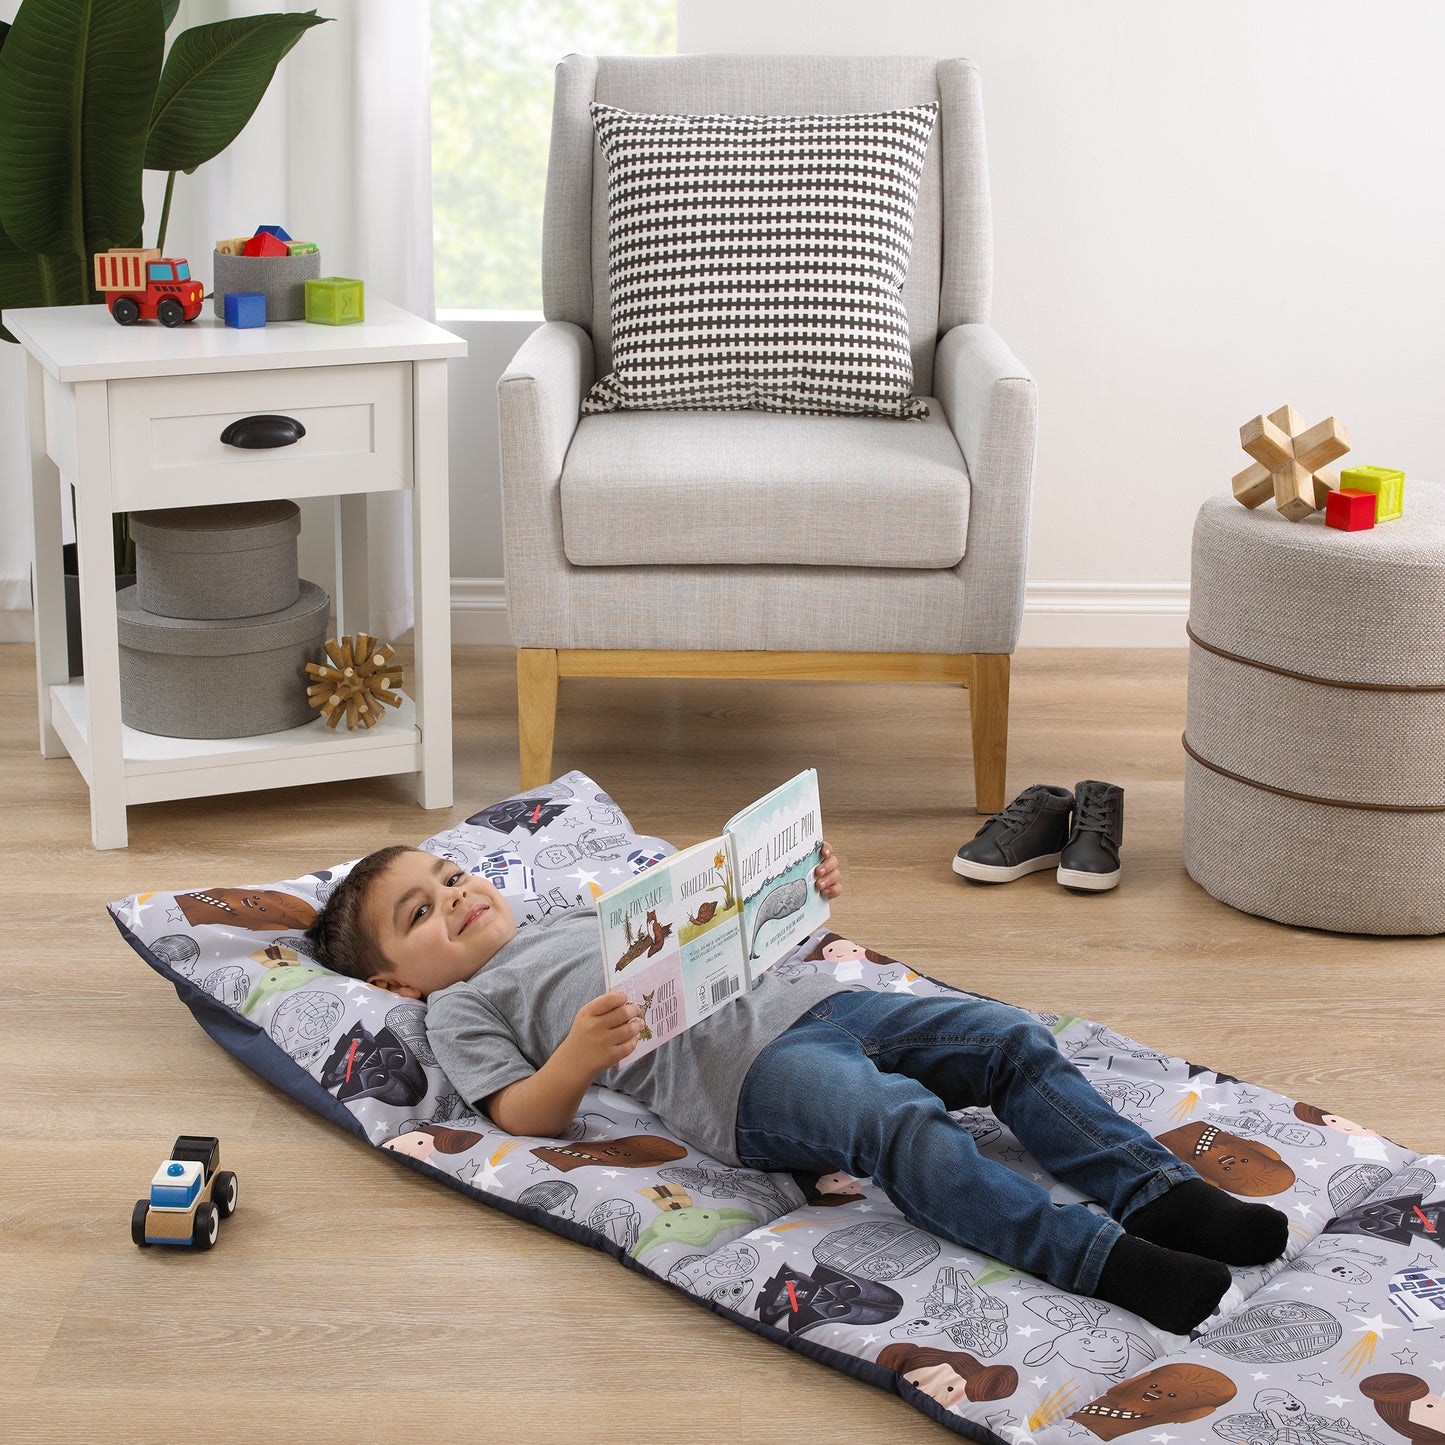 Star Wars Welcome to the Galaxy Navy and Gray Yoda, Princess Leia, R2-D2 , Chewbacca, and Darth Vader Deluxe Easy Fold Toddler Nap Mat